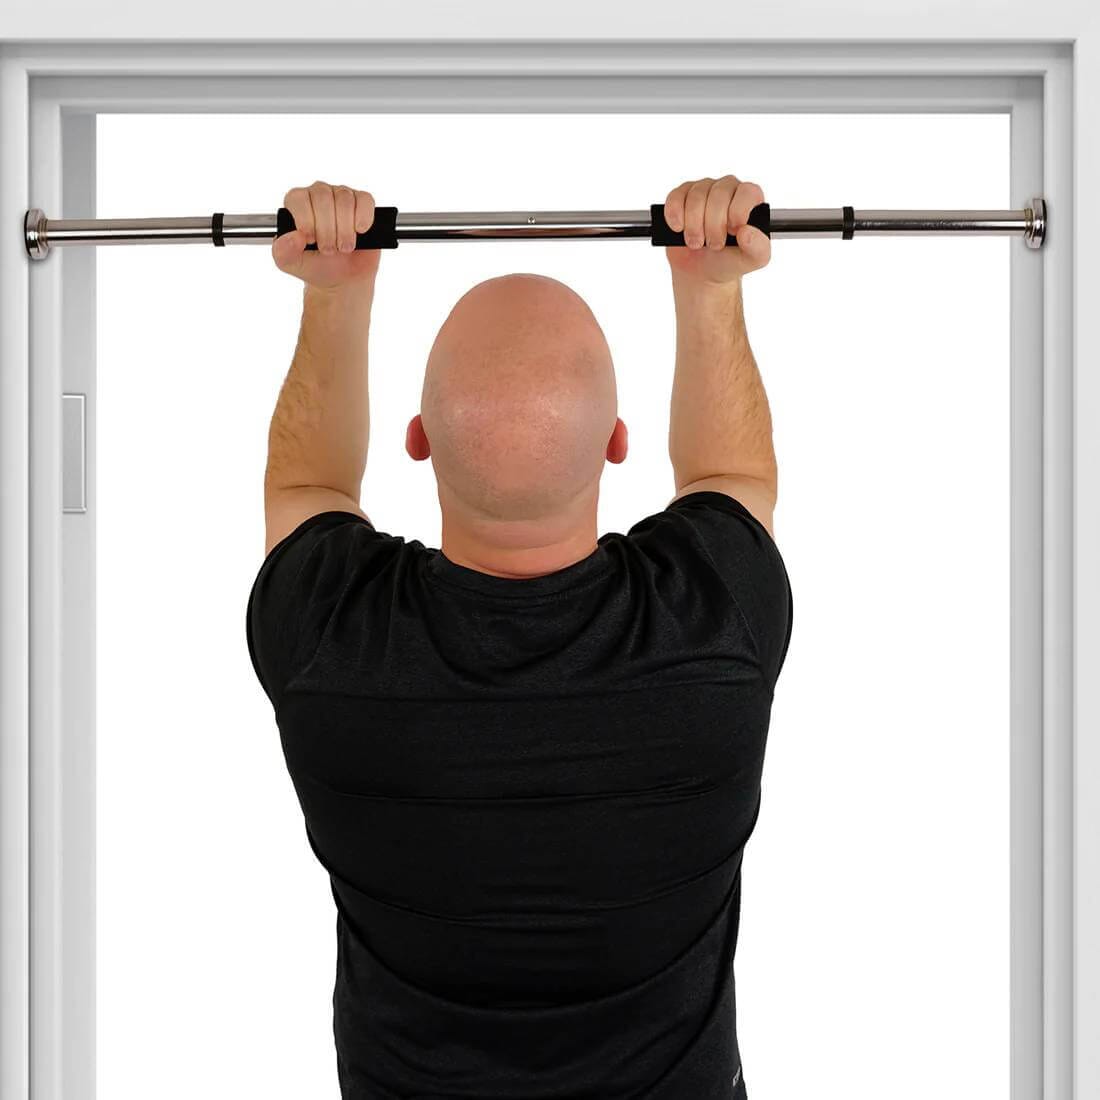 Sunny Health & Fitness Home Doorway Pull Up Bar-Sturdy Chrome Plated Steel - Adjustable Length-24.5-36